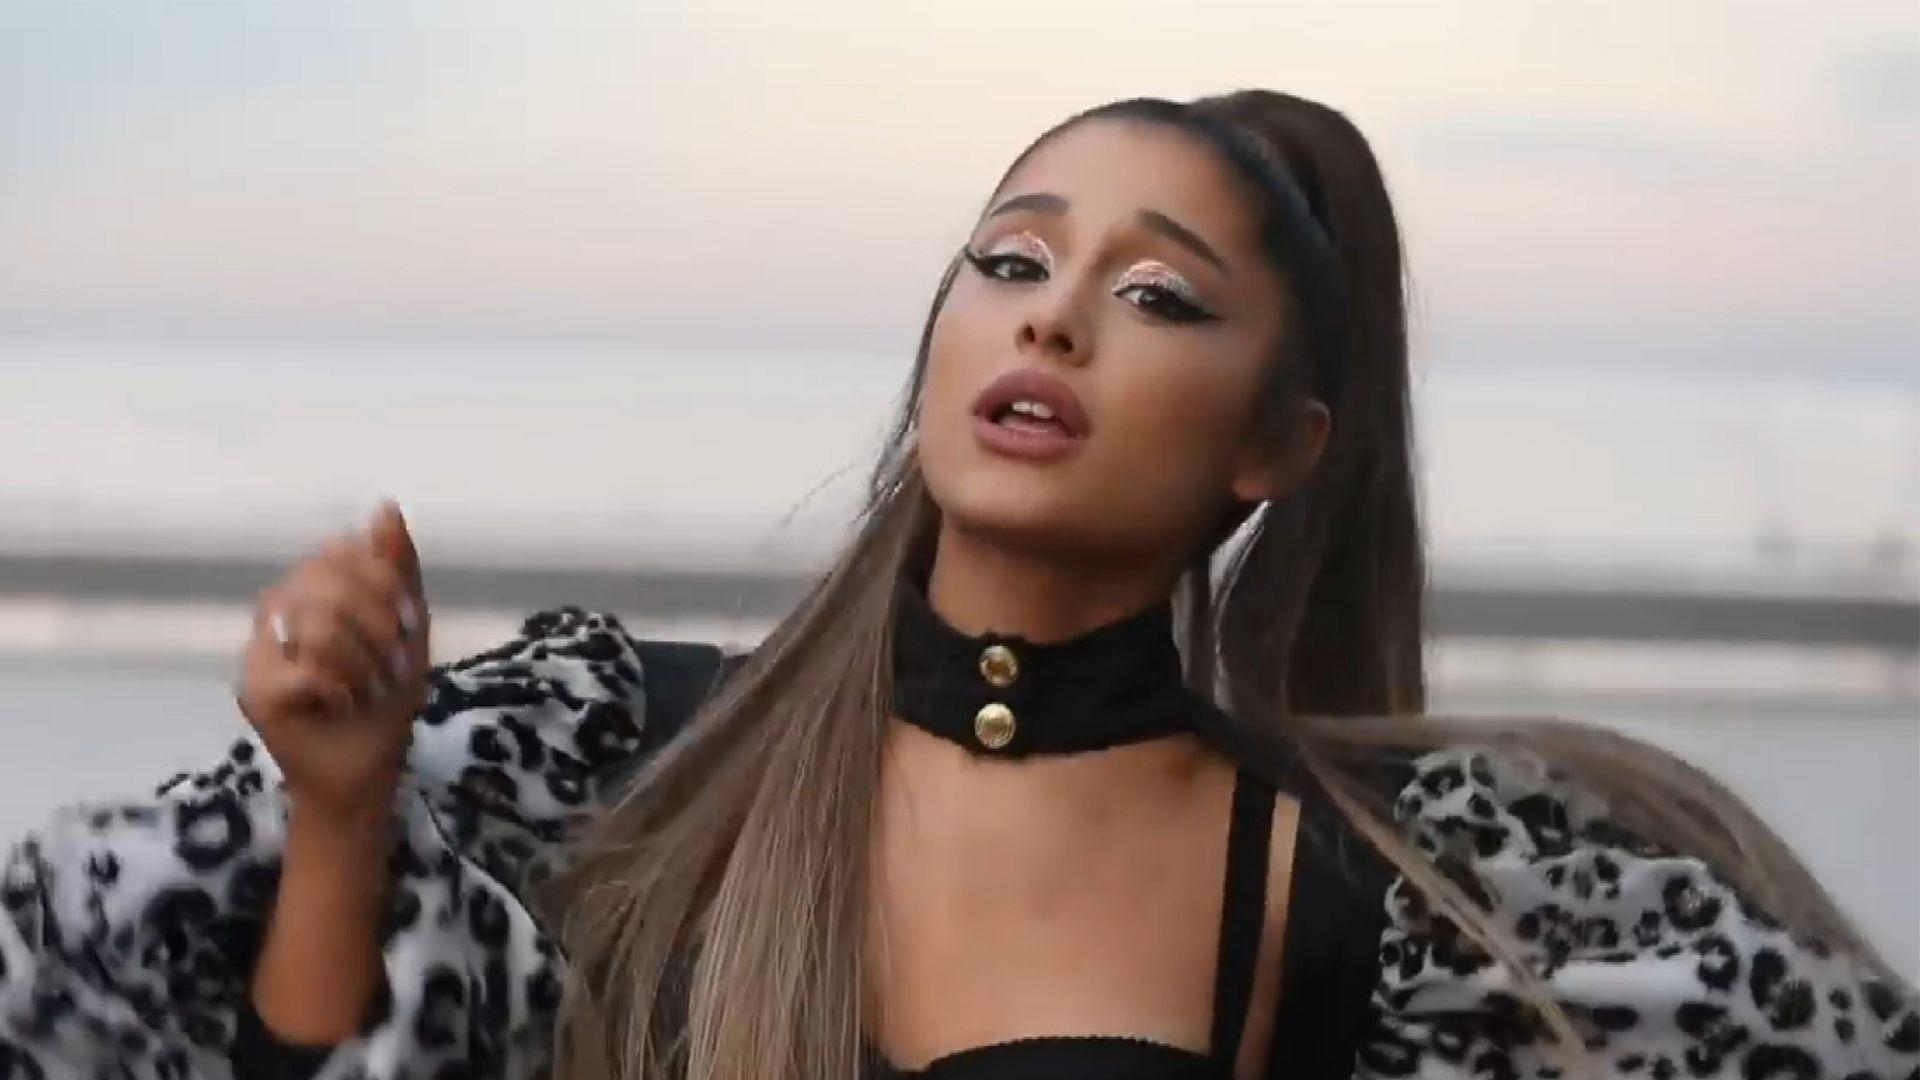 21 Rare and Interesting Facts About Ariana Grande That You May Not Know